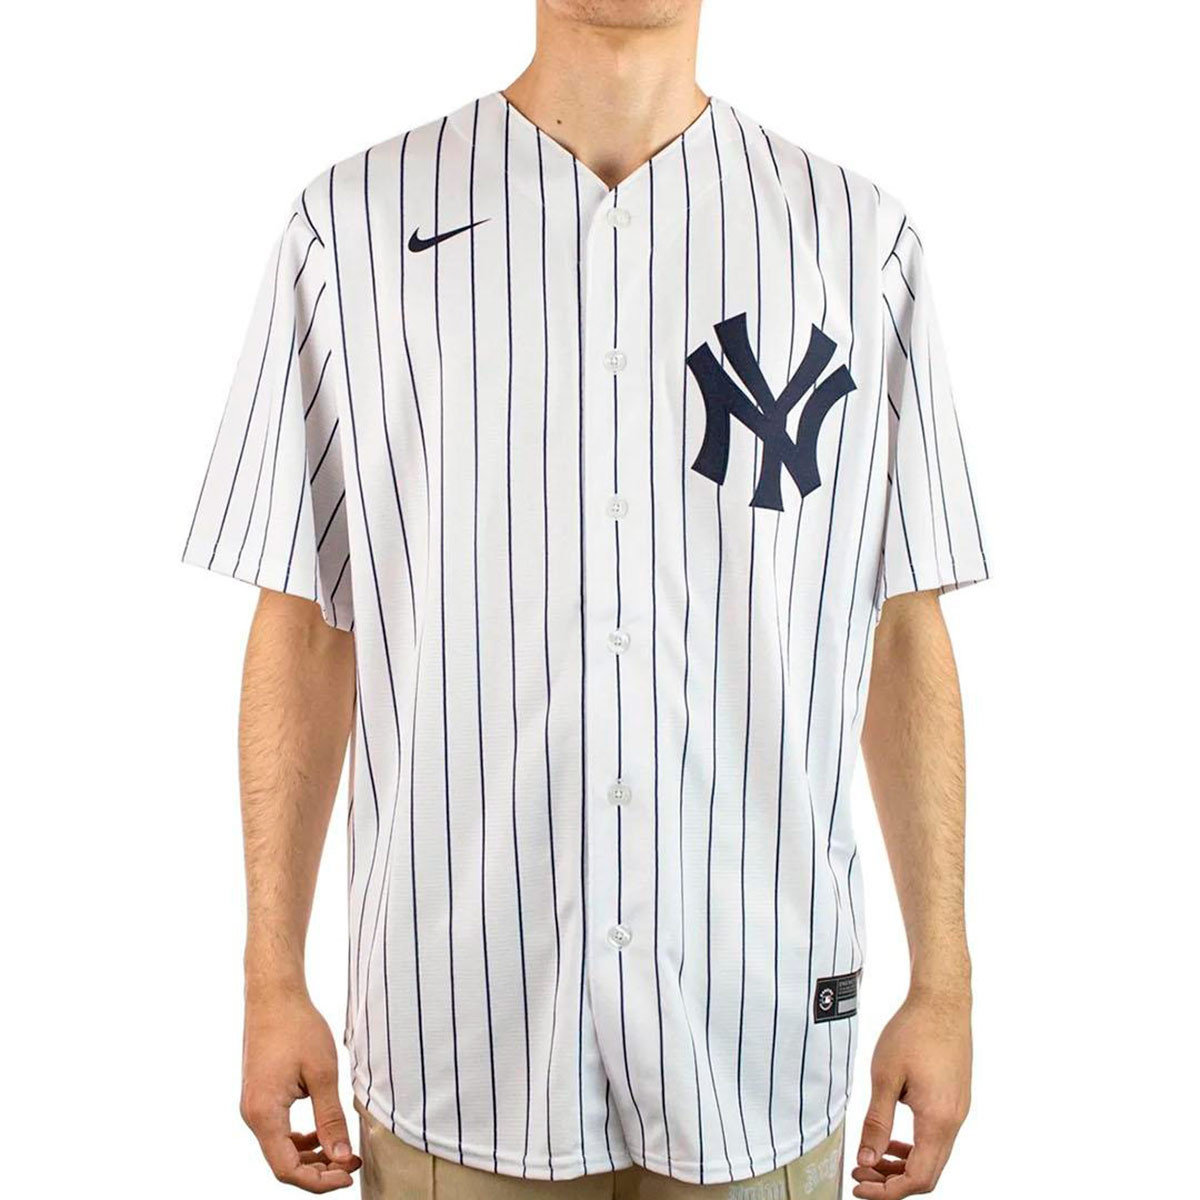 NY Yankees Replica Home Jersey by Nike